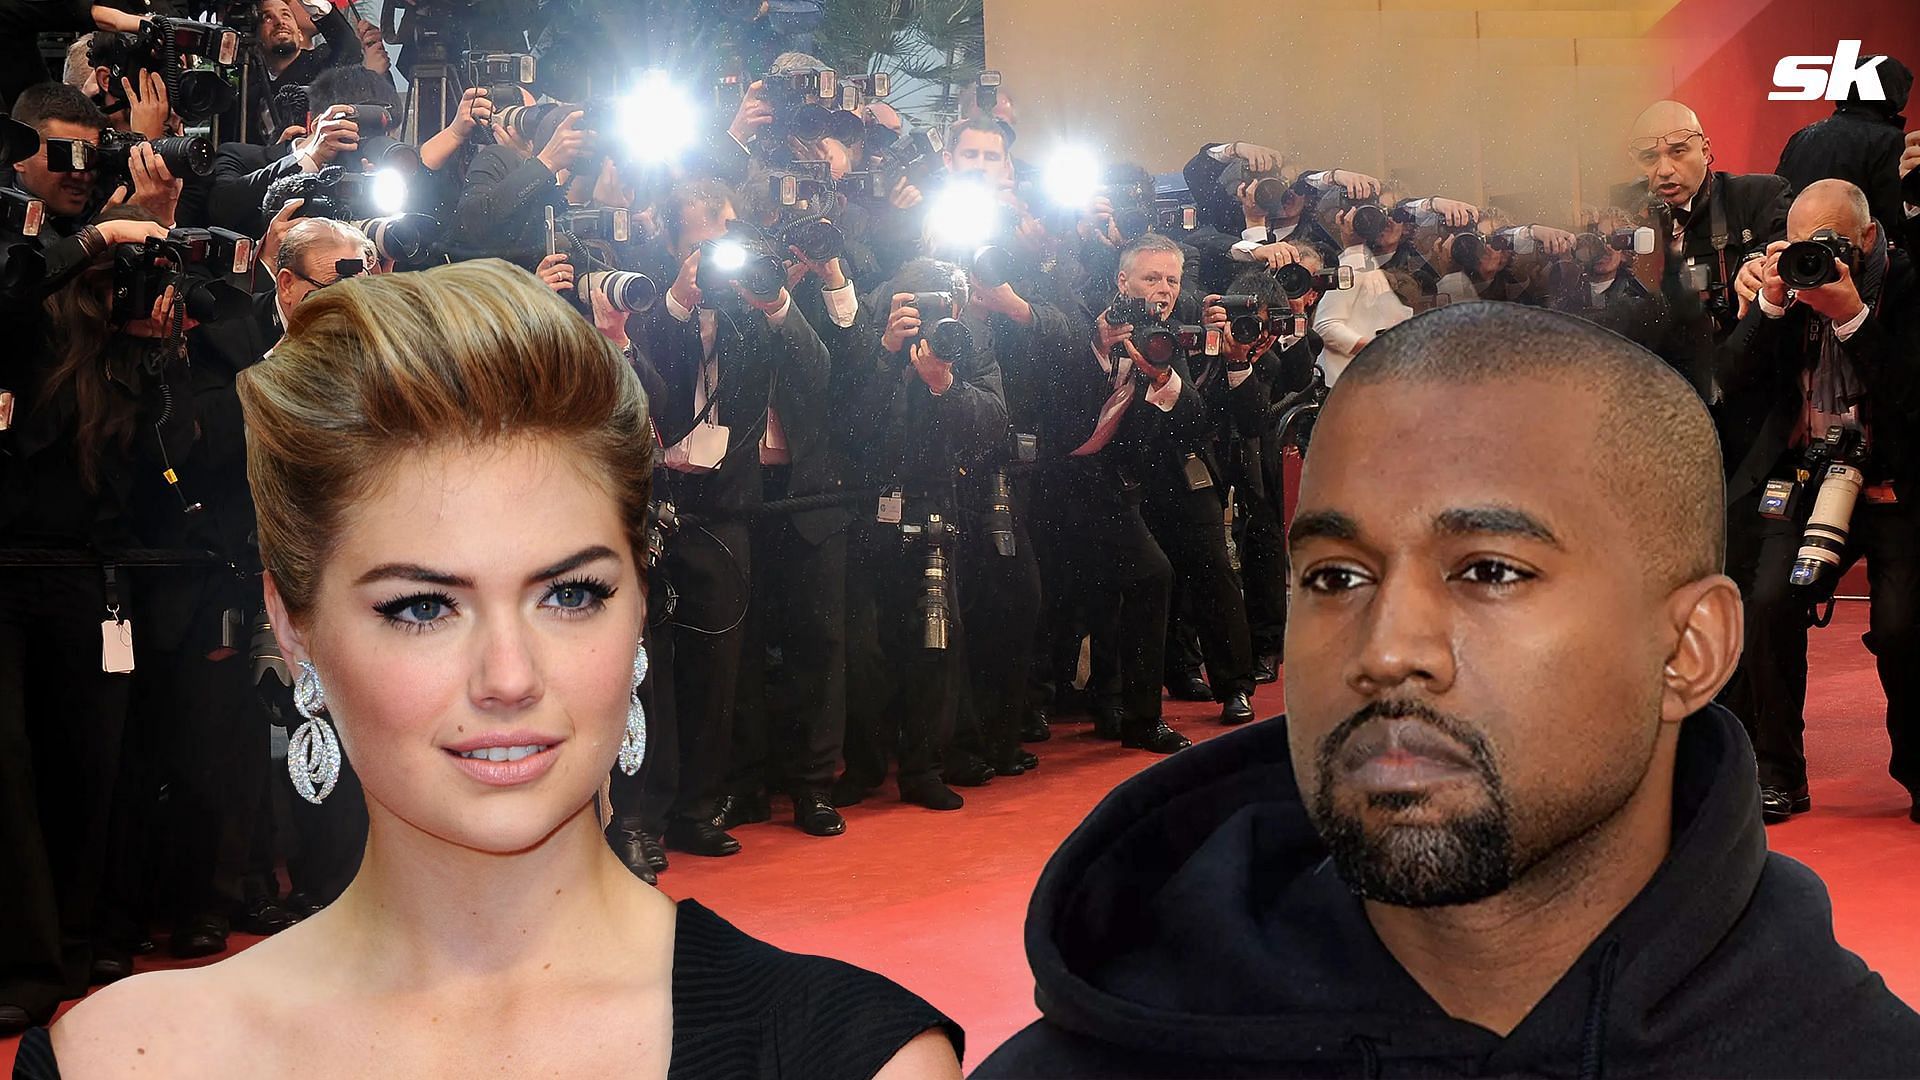 Did Kate Upton date Kanye West in 2011?